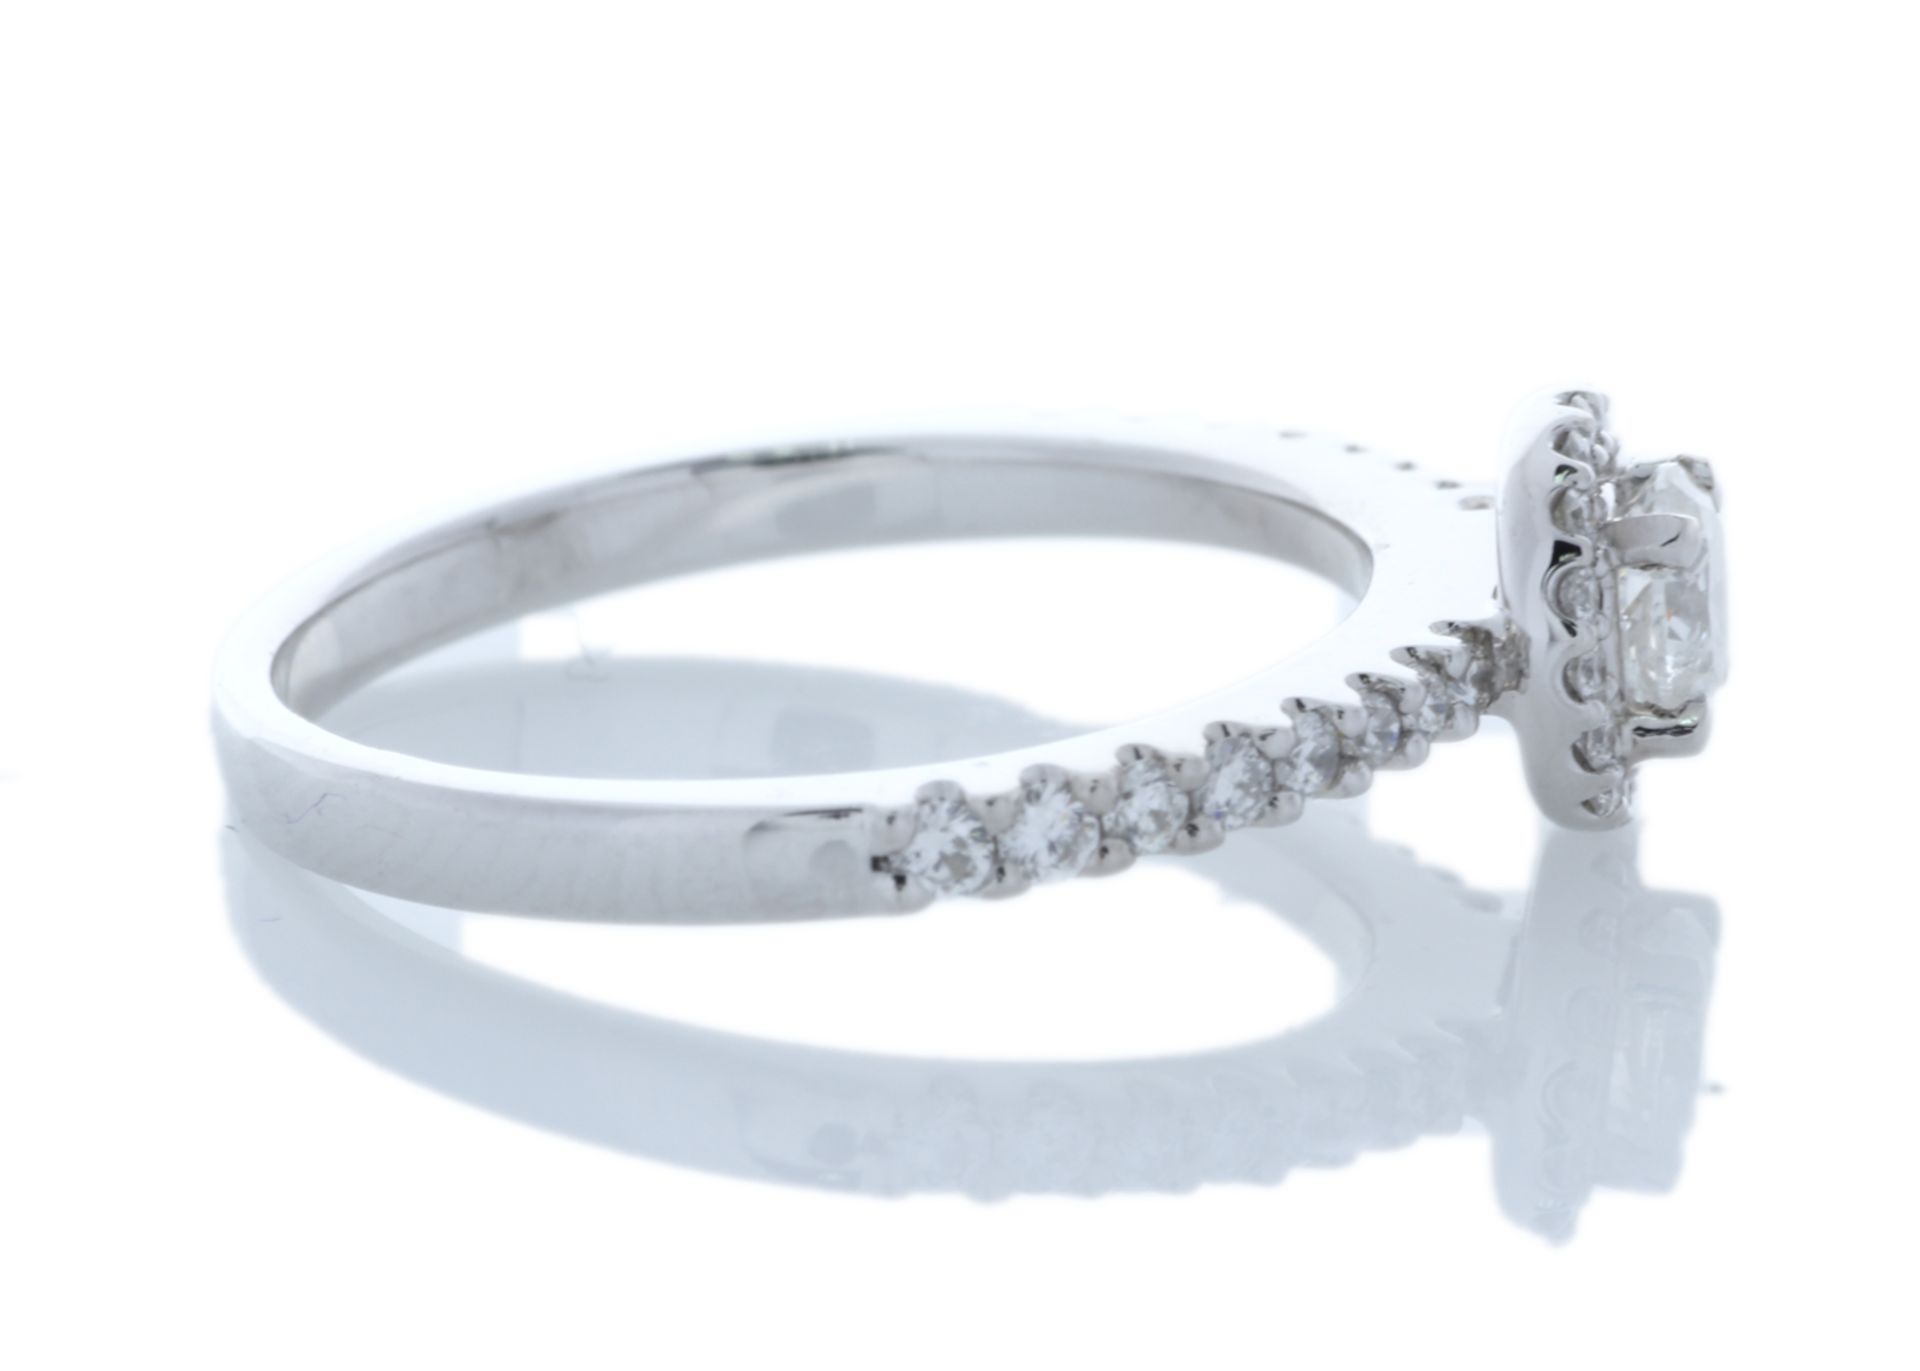 18ct White Gold Single Stone With Halo Setting Ring (0.31) 0.63 Carats - Valued by GIE £3,645.00 - - Image 4 of 5